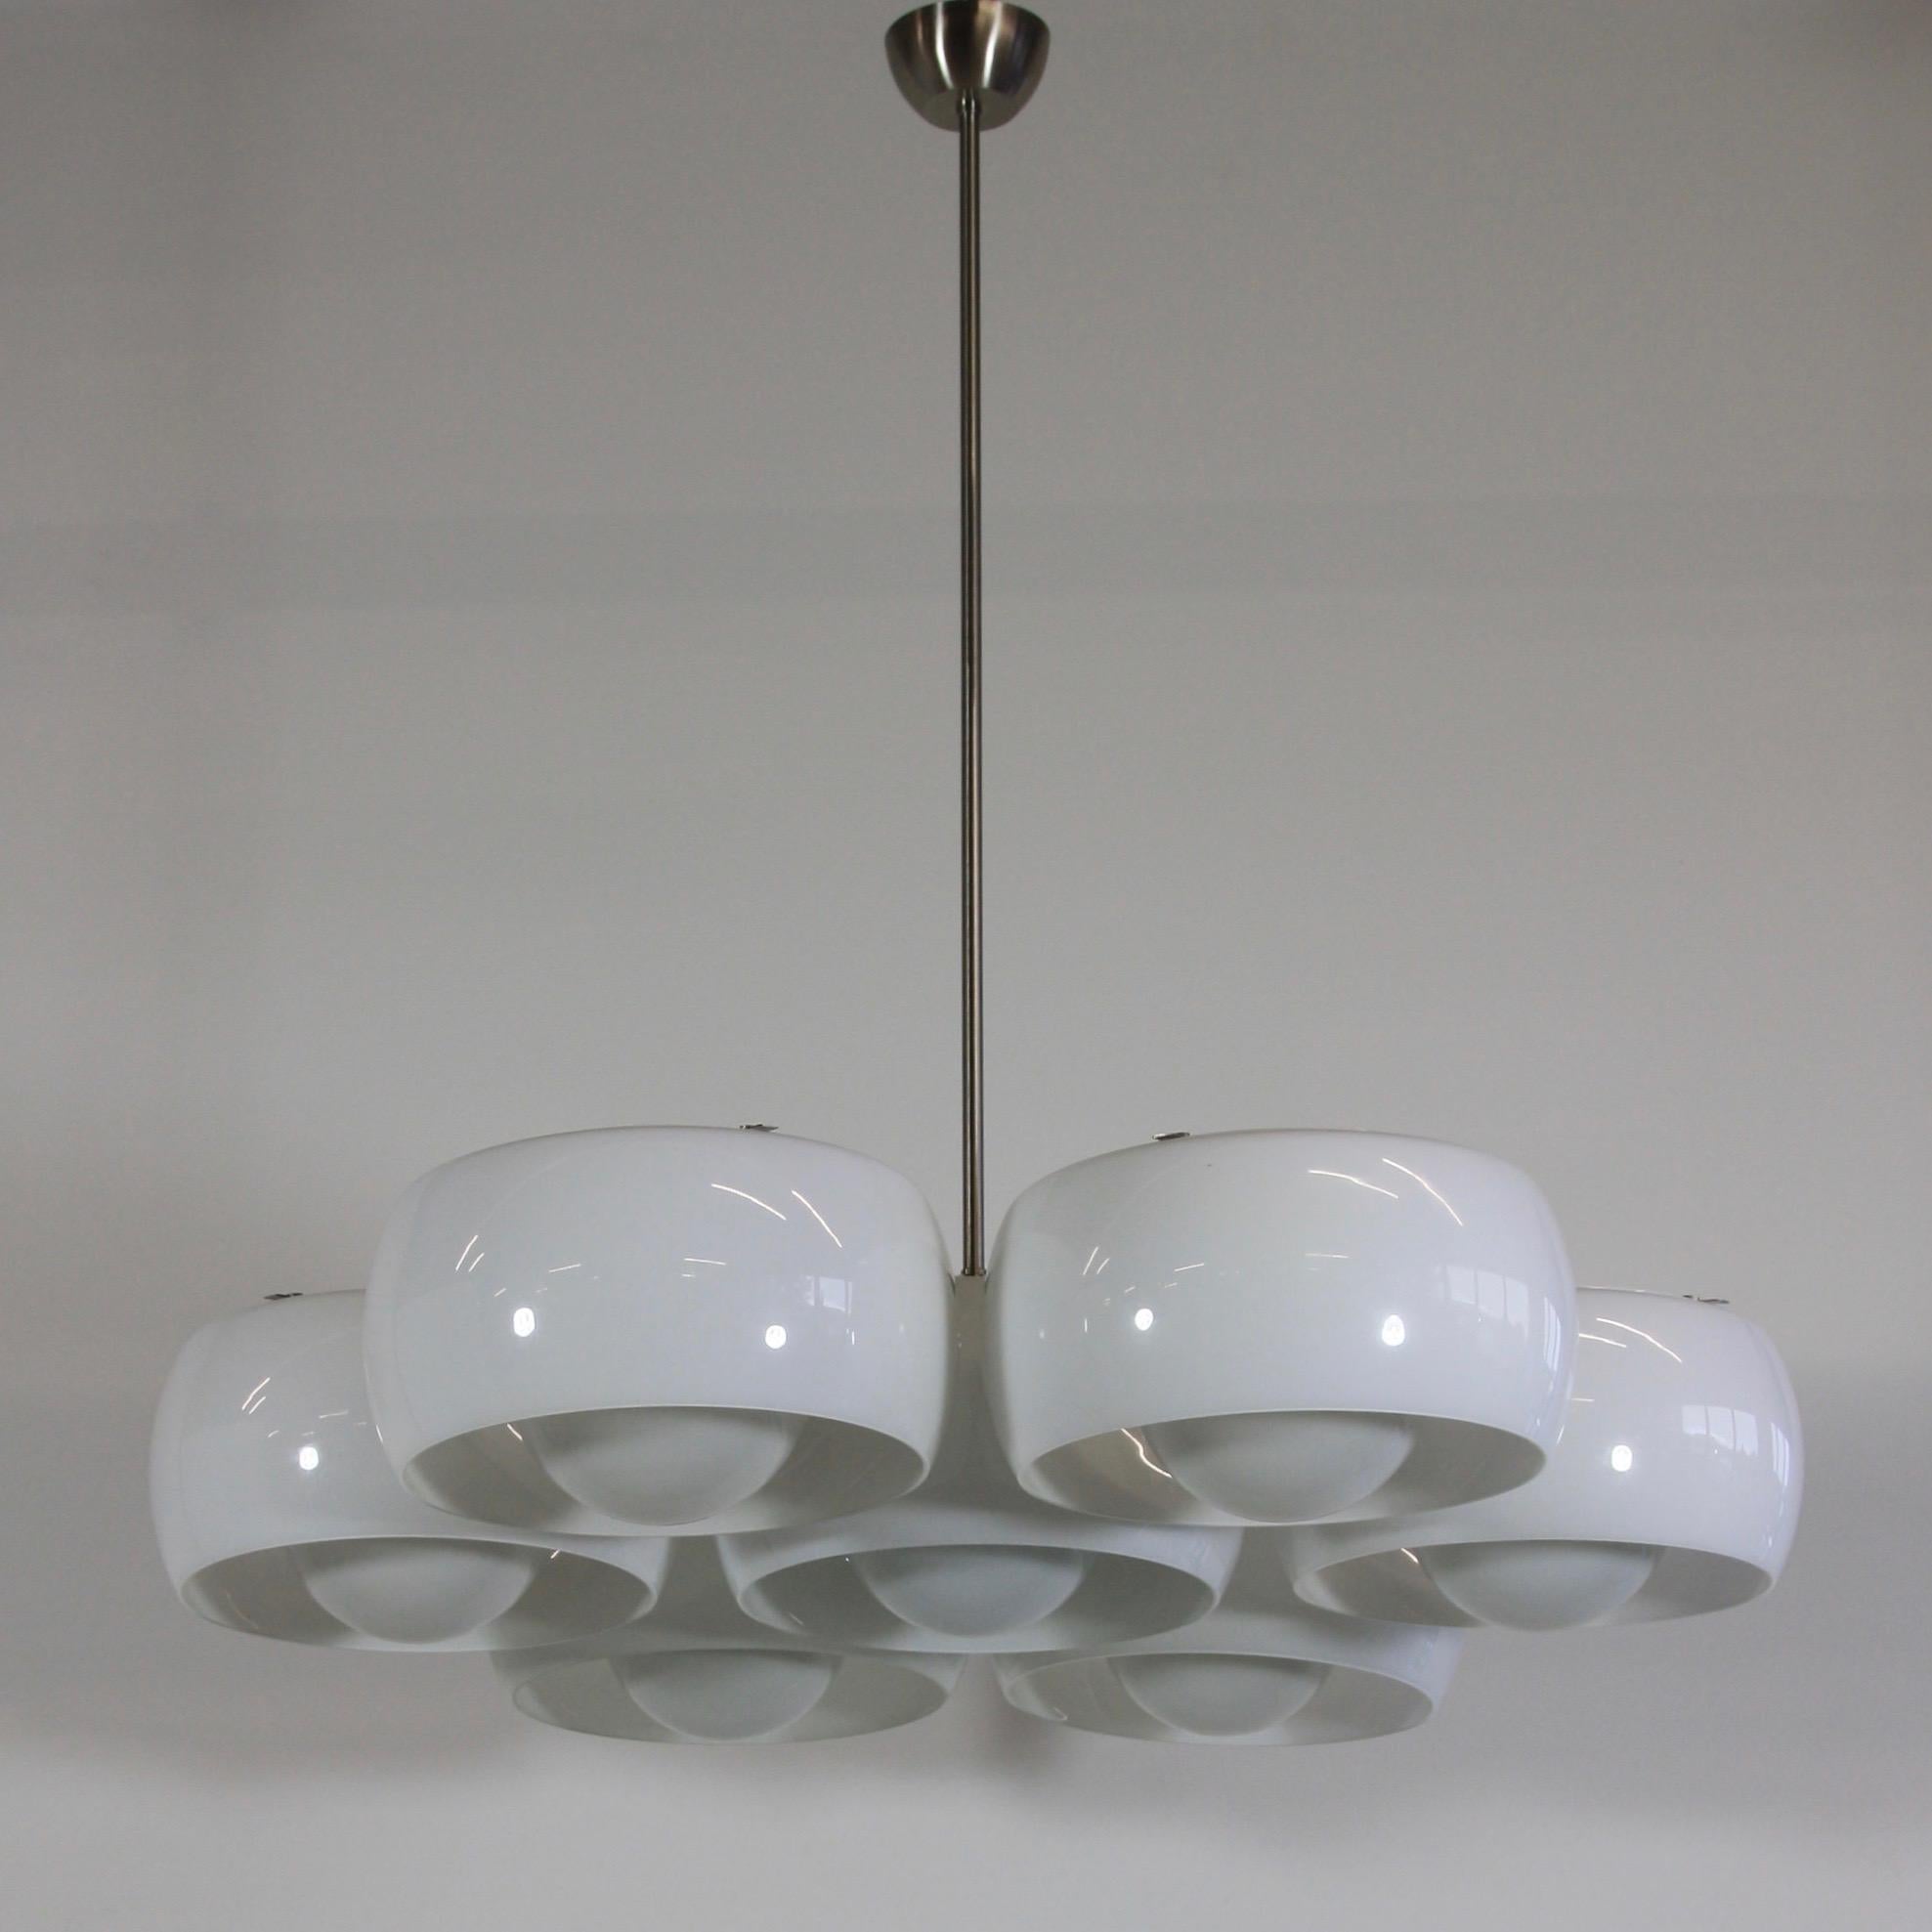 Metal Ceiling Lamp Eptaclinio Designed by Vico Magistretti for Artemide, 1961